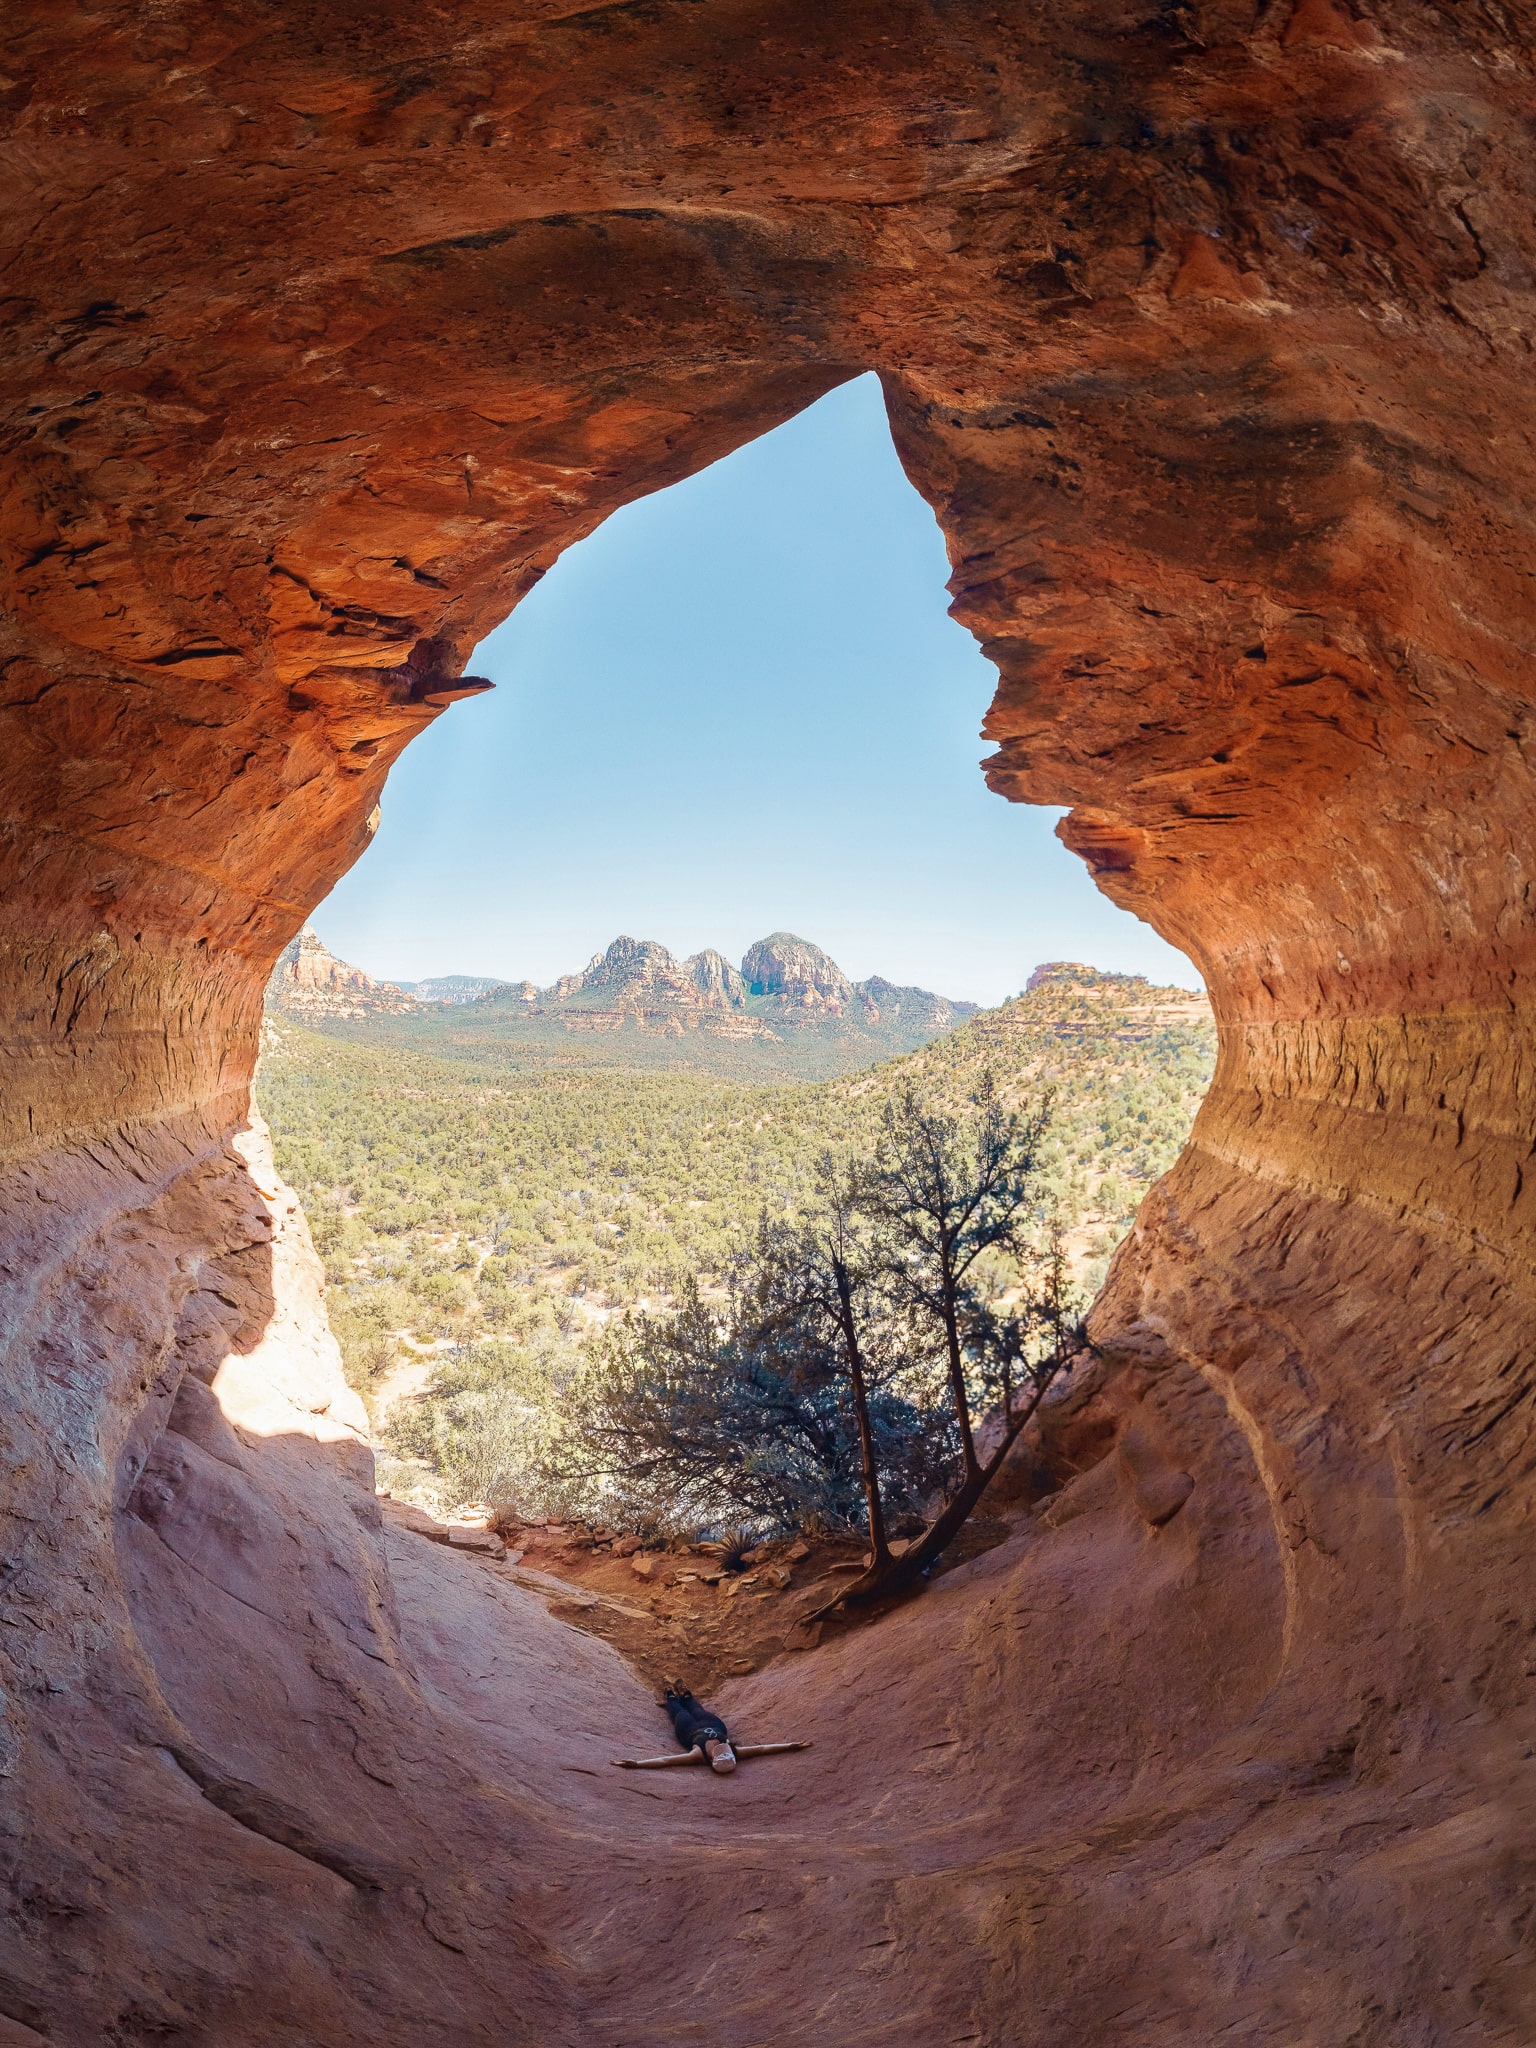 Hiking to the hidden birthing cave on your Las Vegas to Sedona road trip